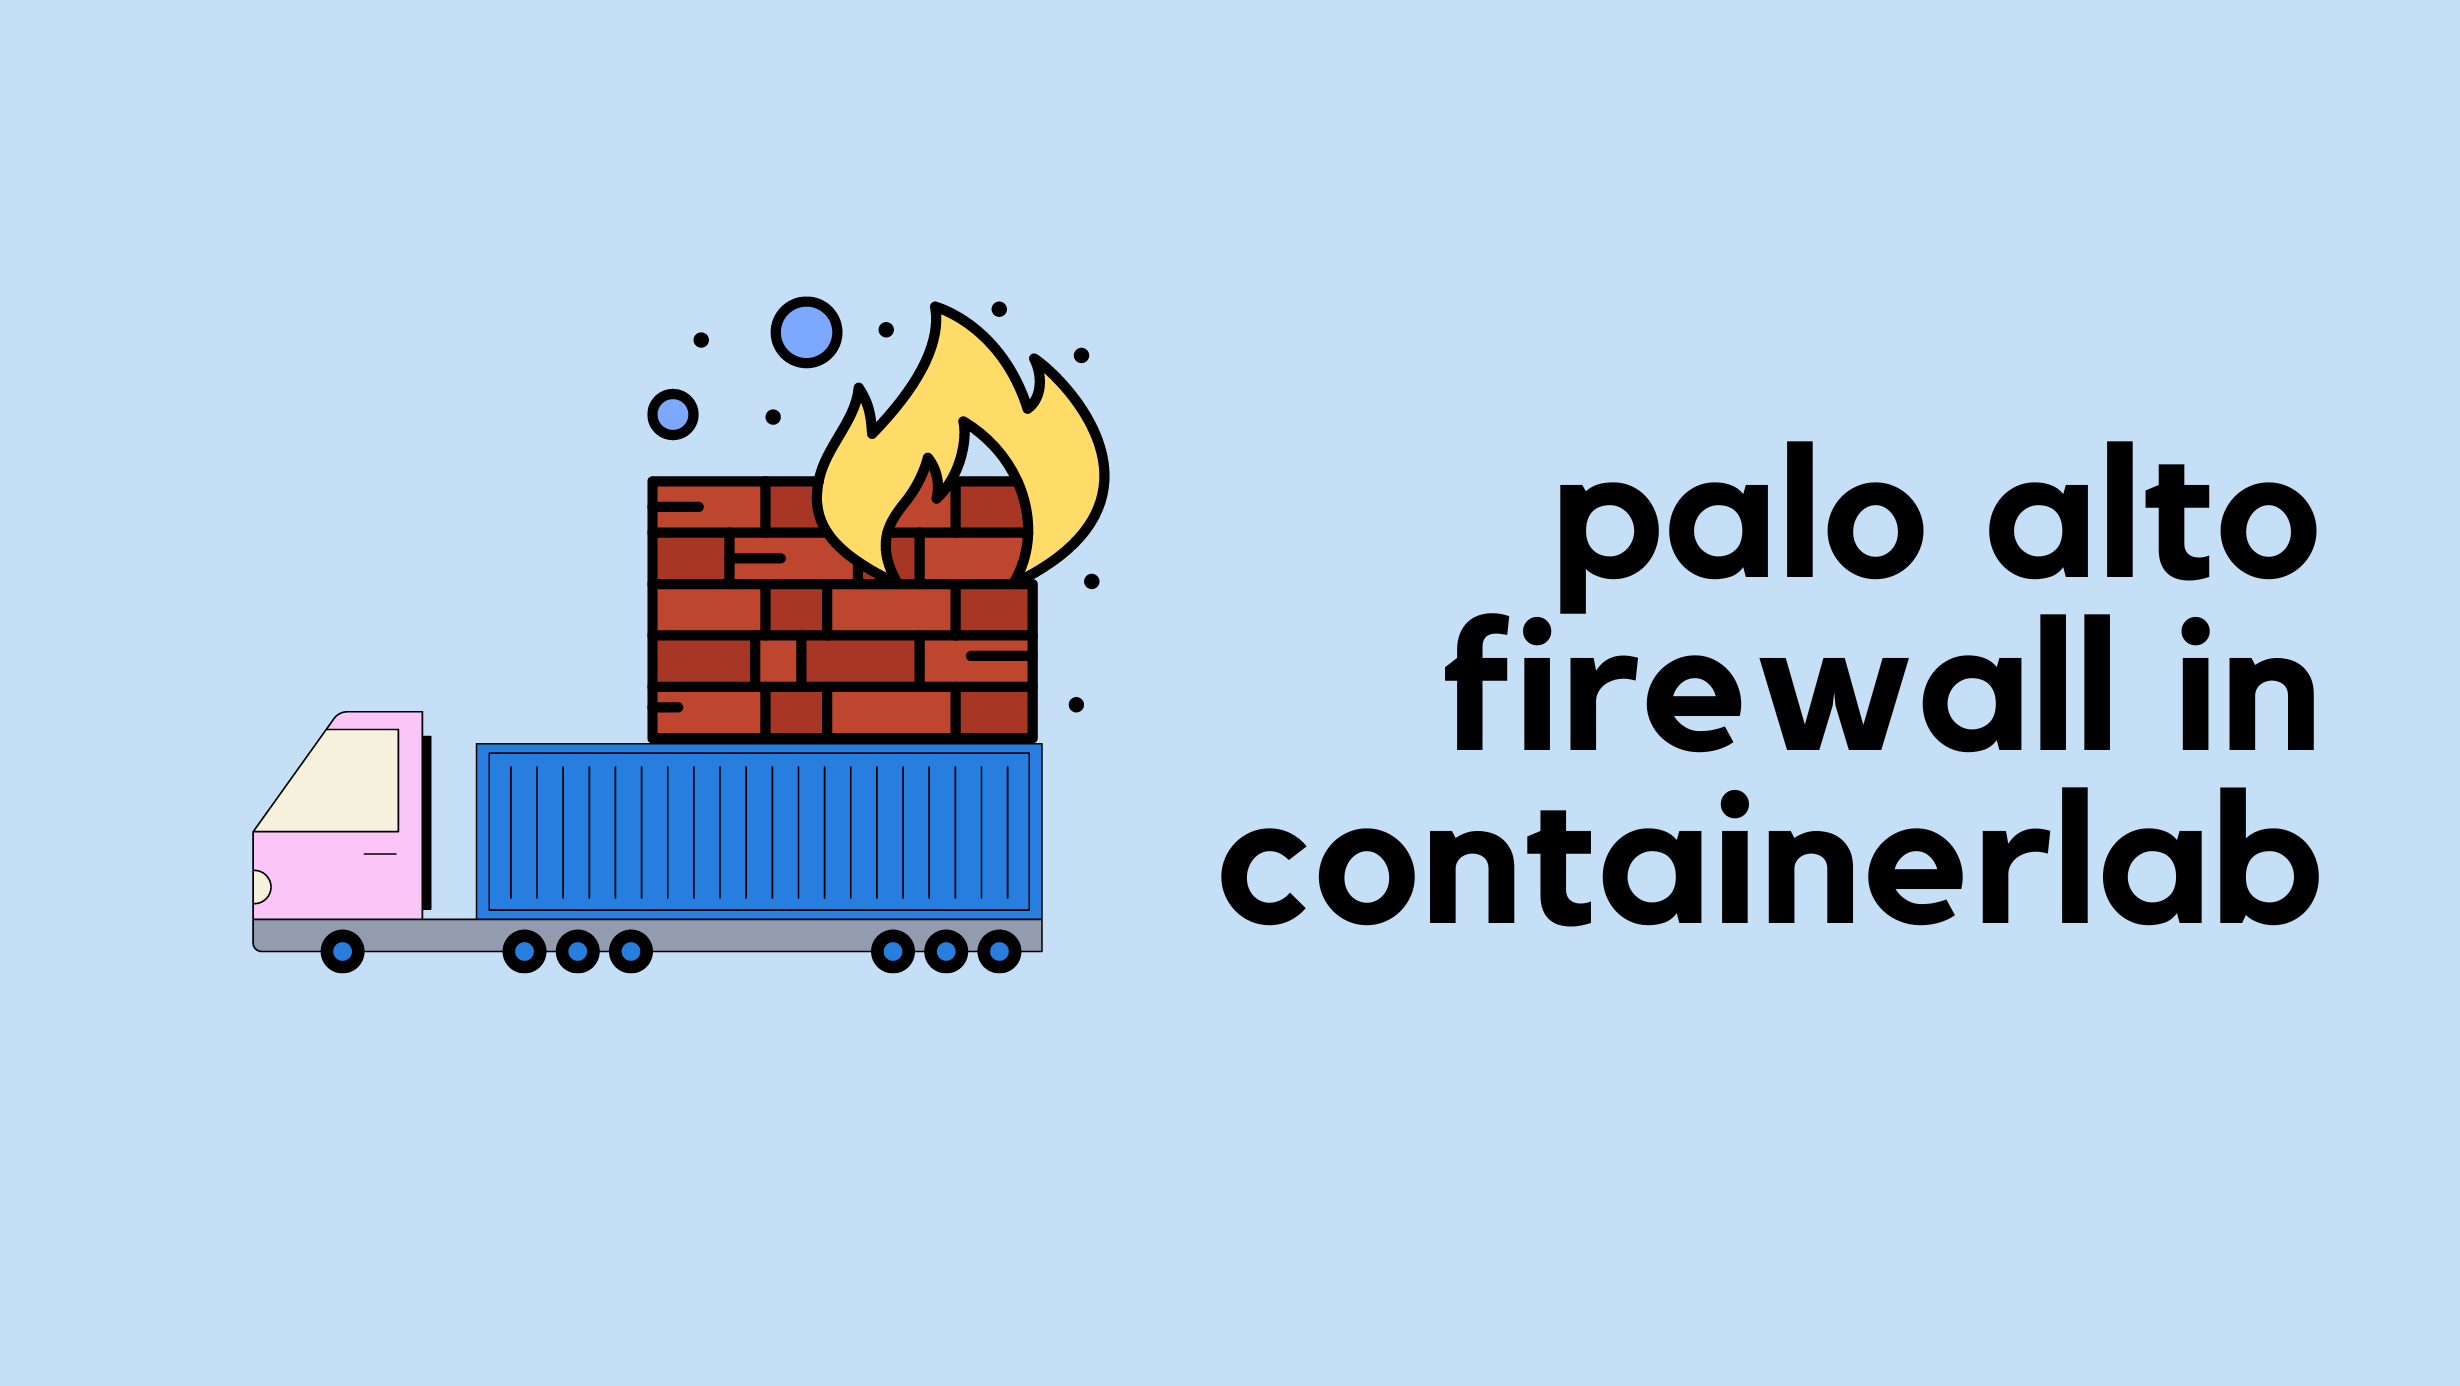 Running Palo Alto Firewall in Containerlab